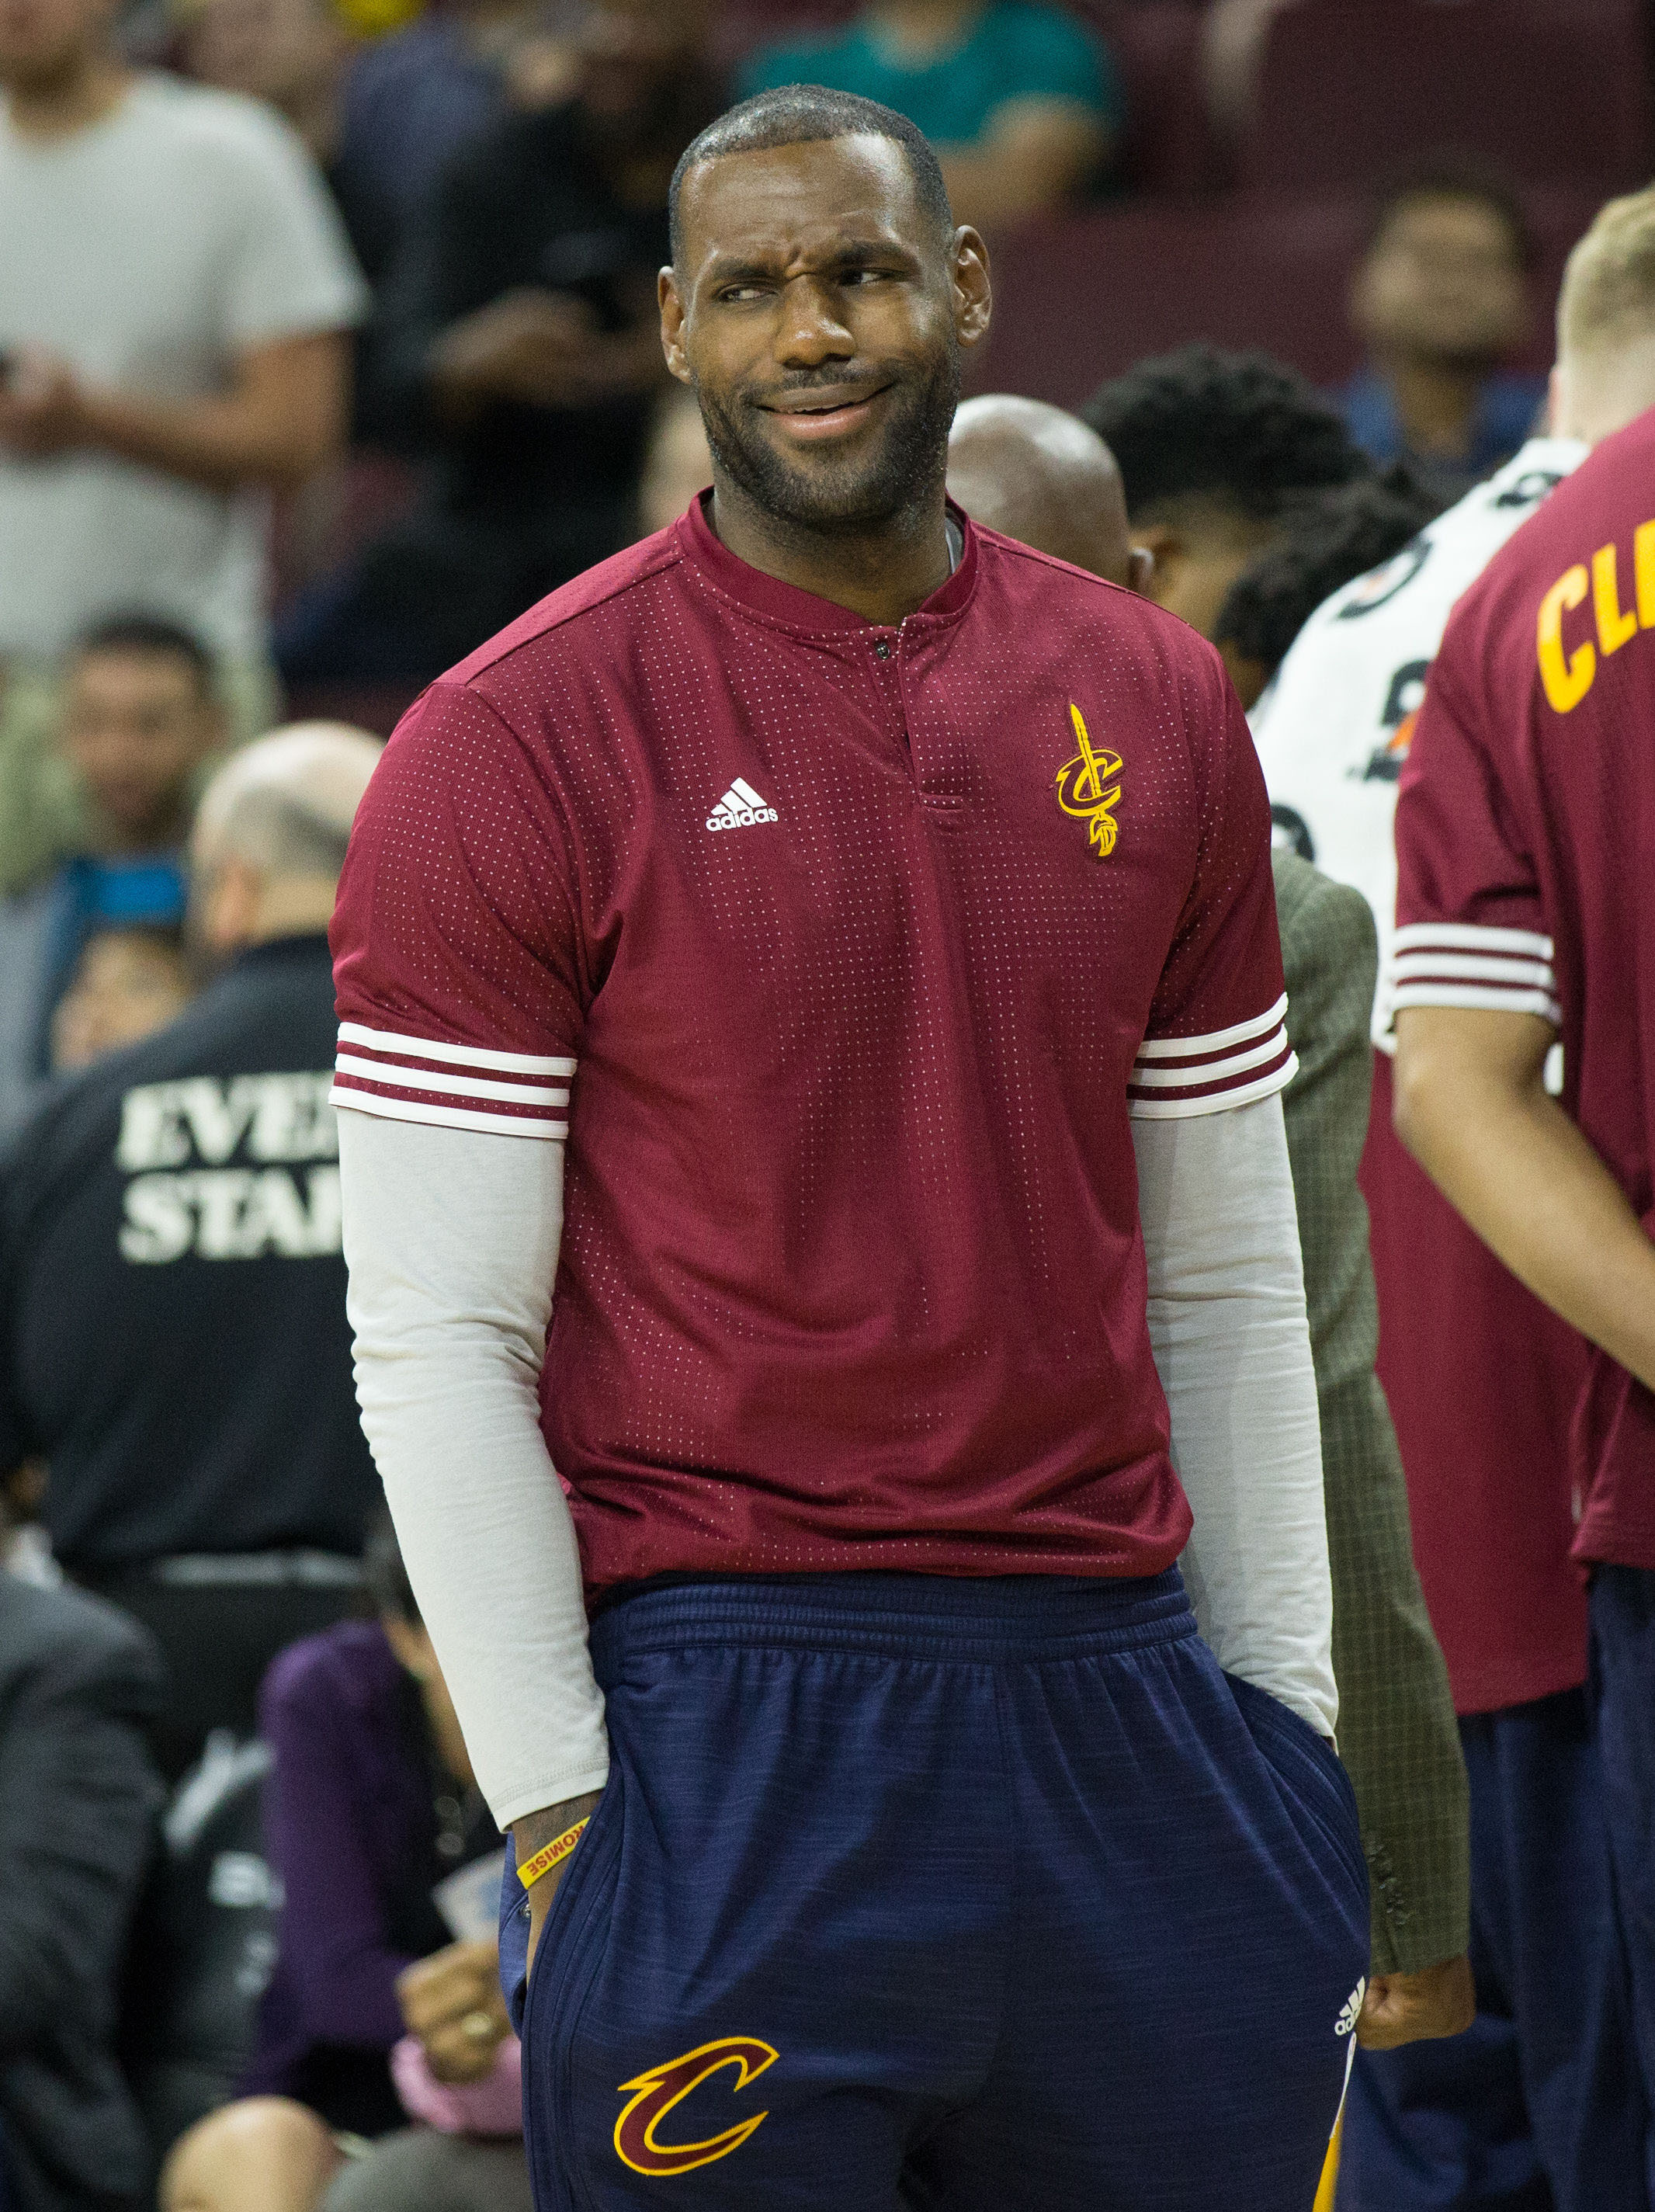 LeBron James for 3 scrubs? Don't think too hard about that one...